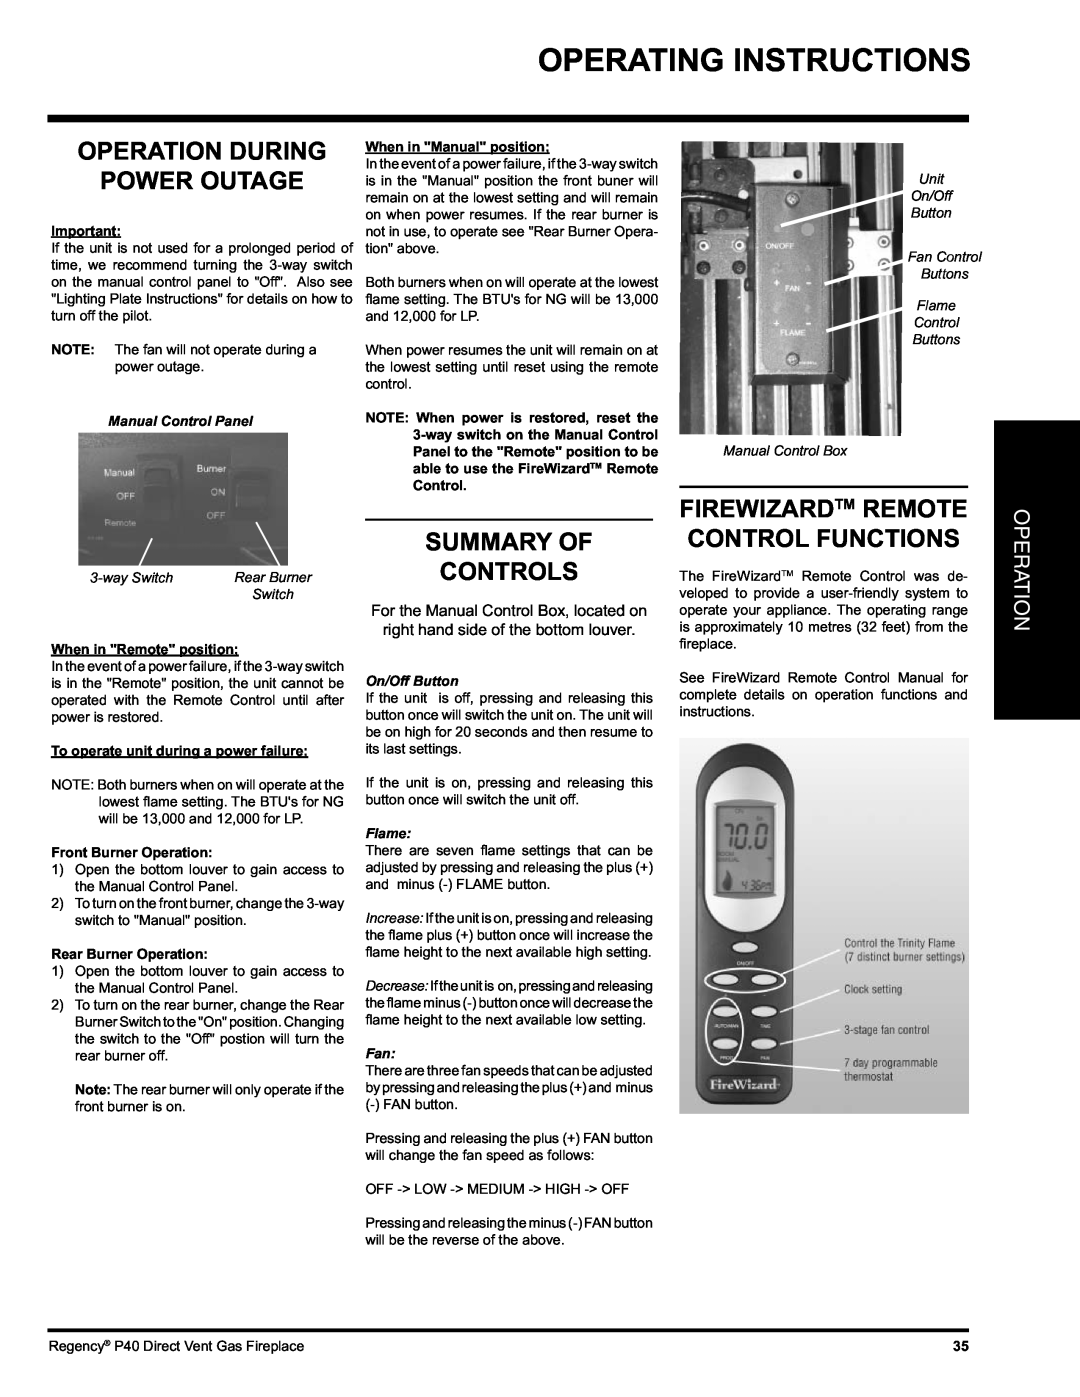 Regency P40 Operation During Power Outage, Summary Of Controls, Firewizardtm Remote Control Functions, waySwitch, Flame 